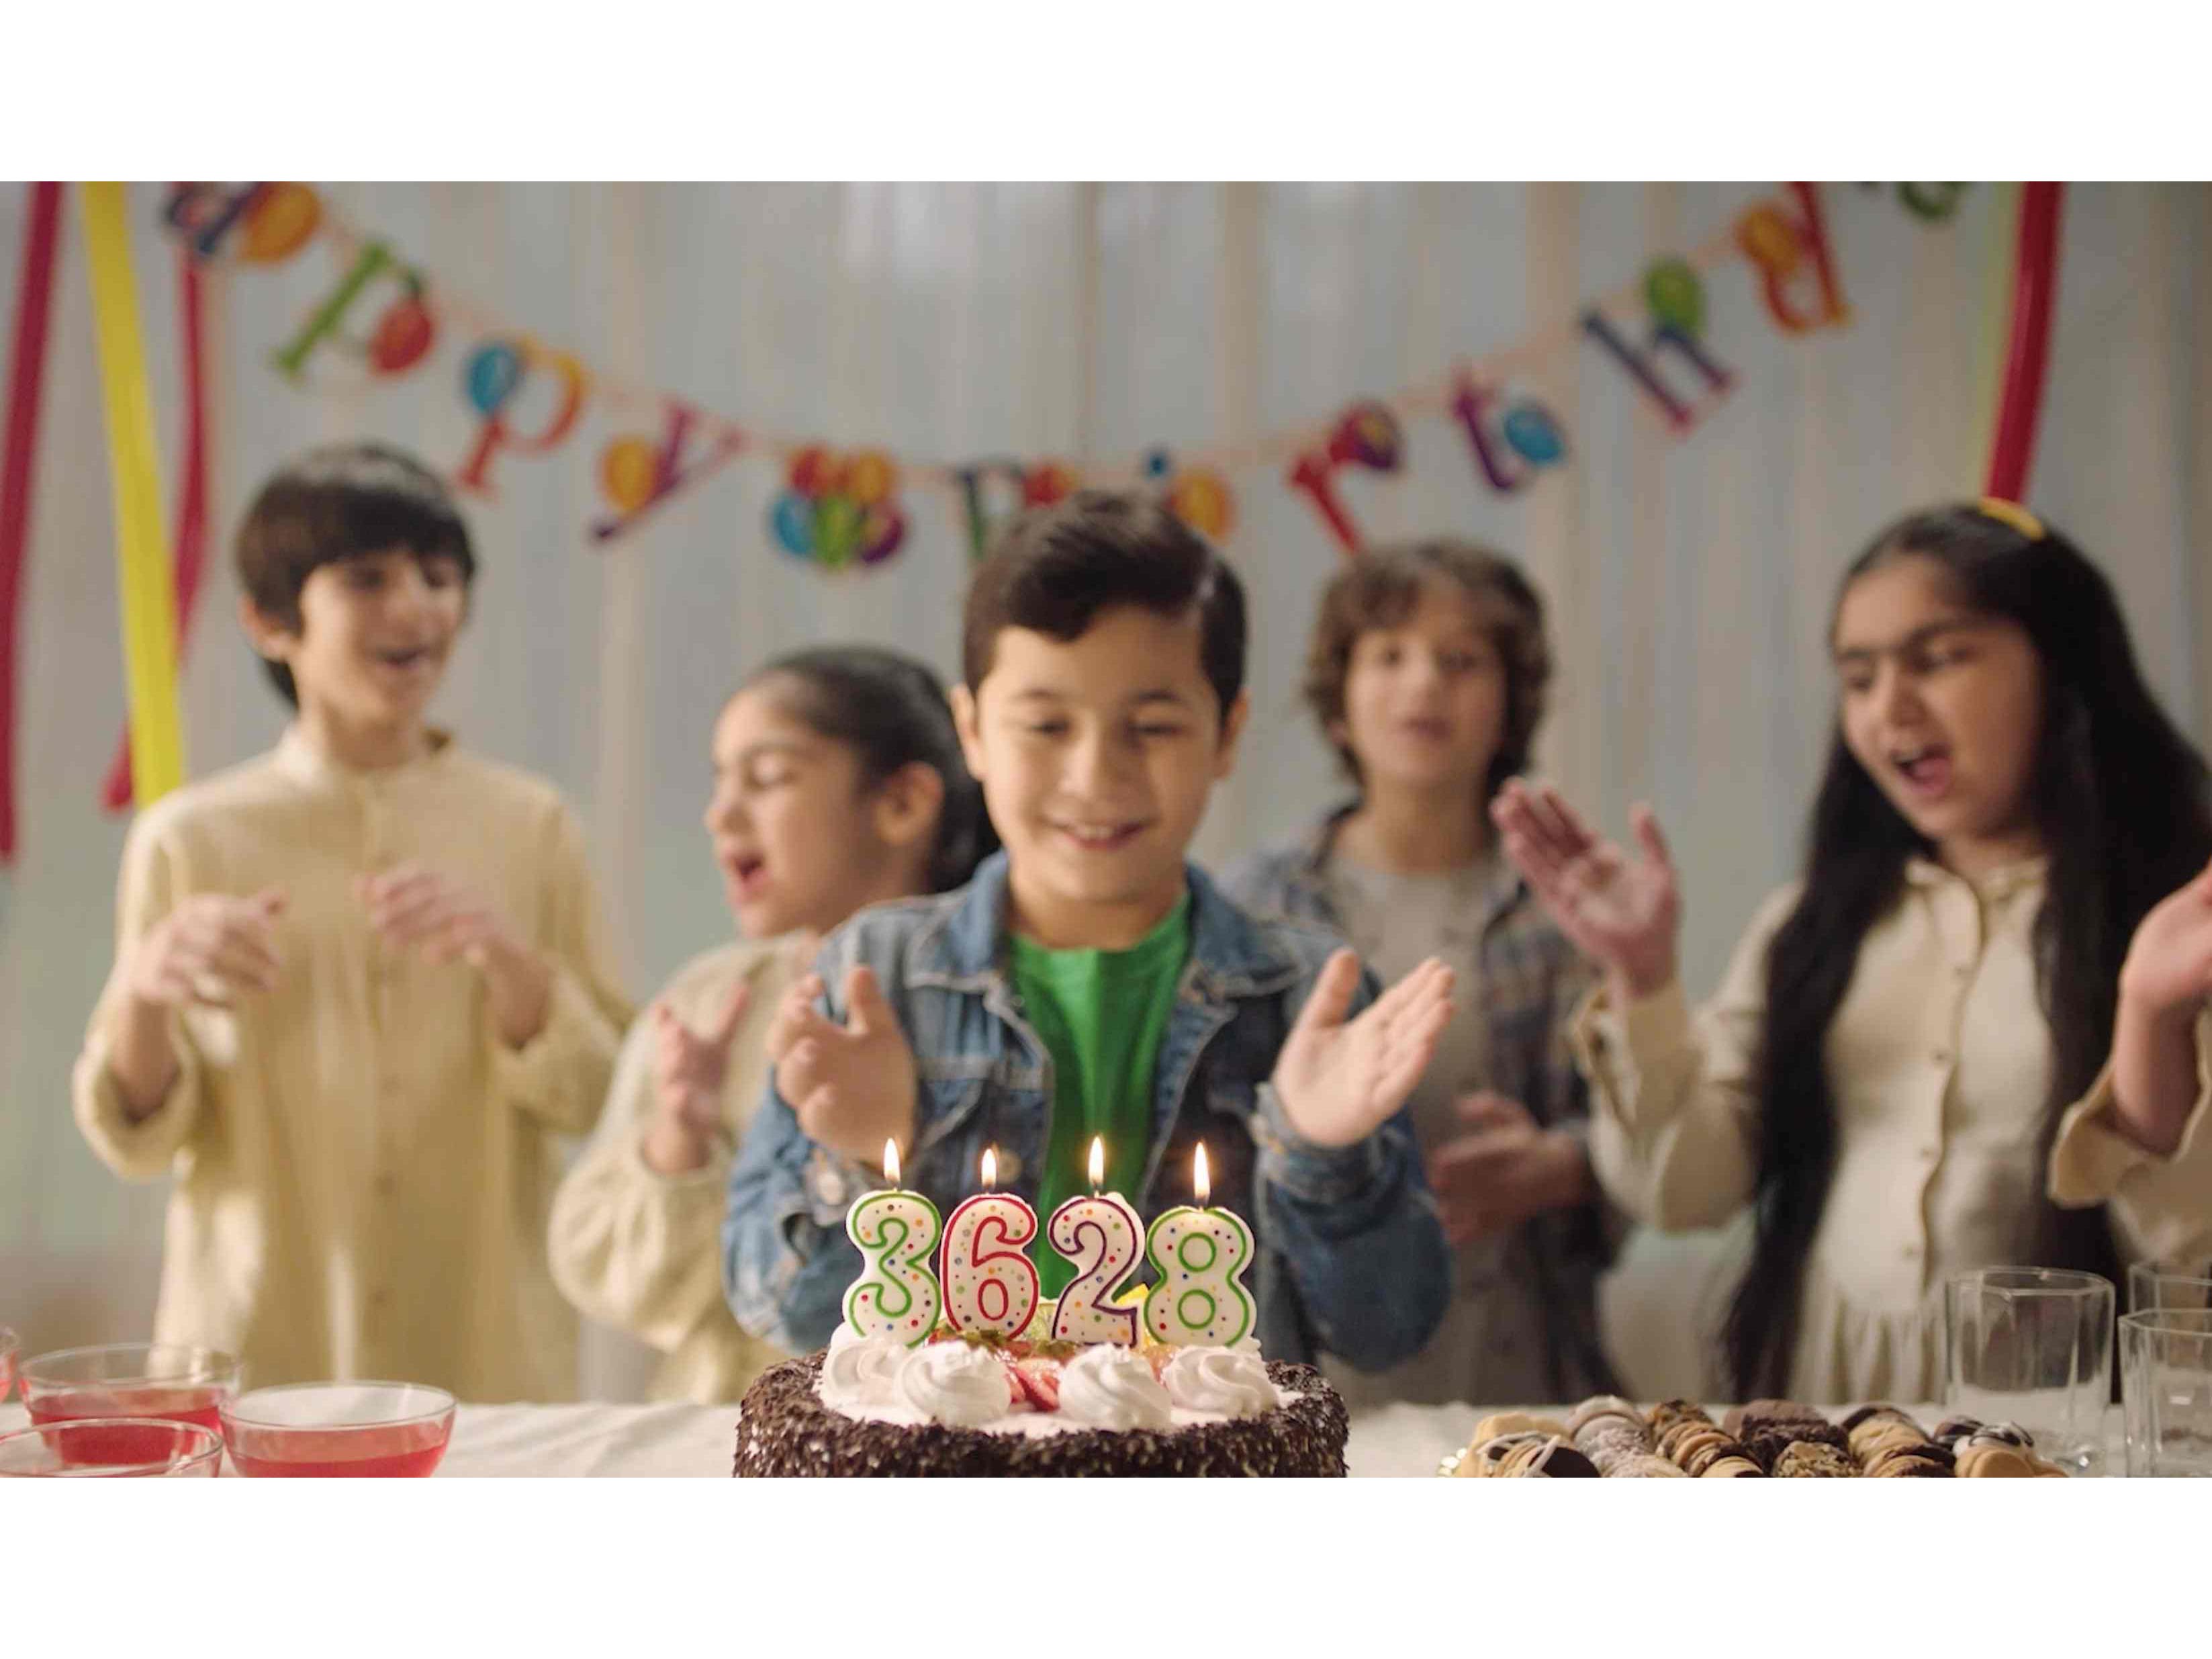 Birthdays get new meaning in campaign for Brave Heart by Impact BBDO